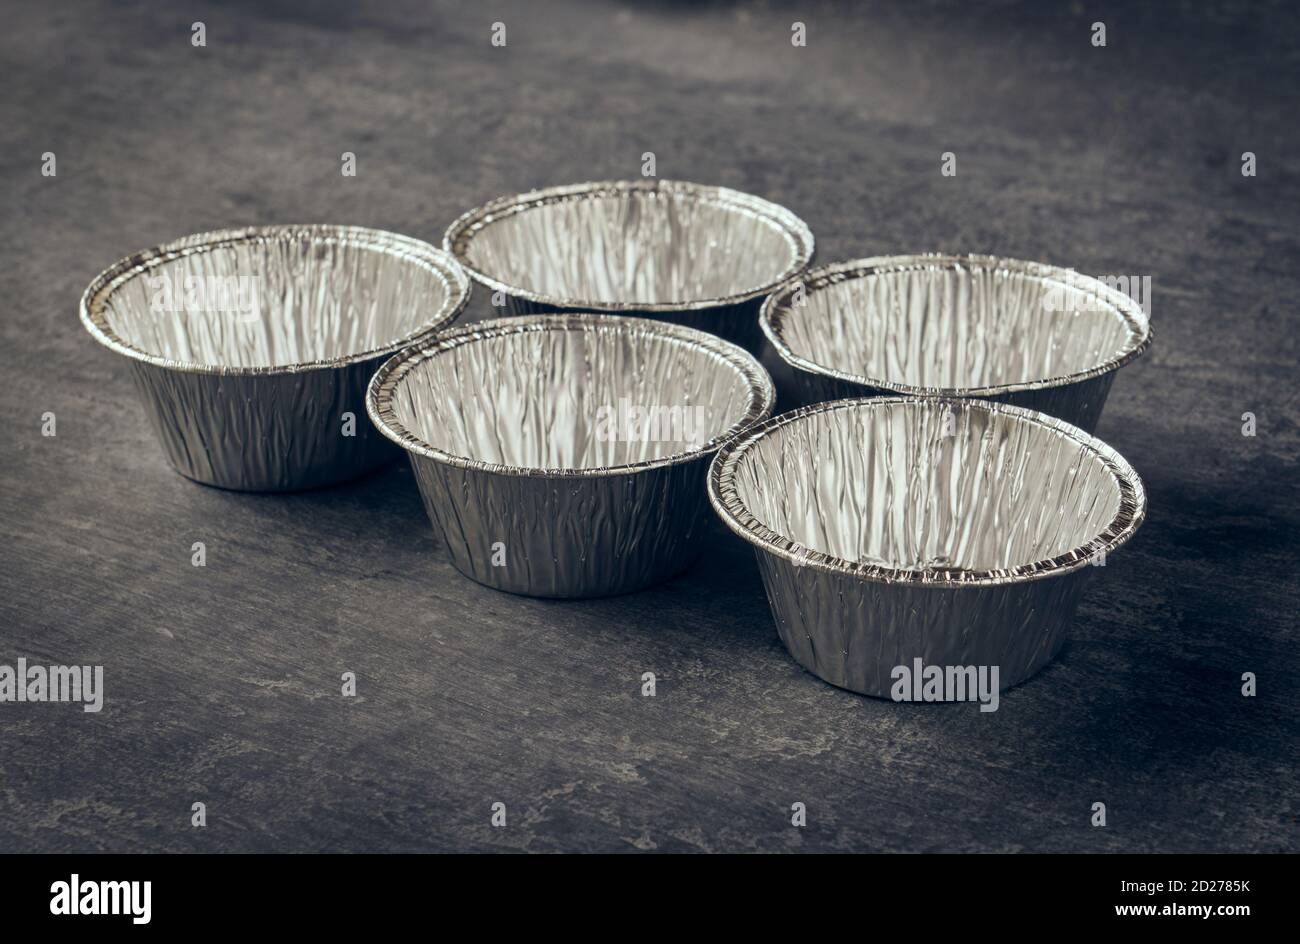 Foil moulds for dough in vintage styling Stock Photo